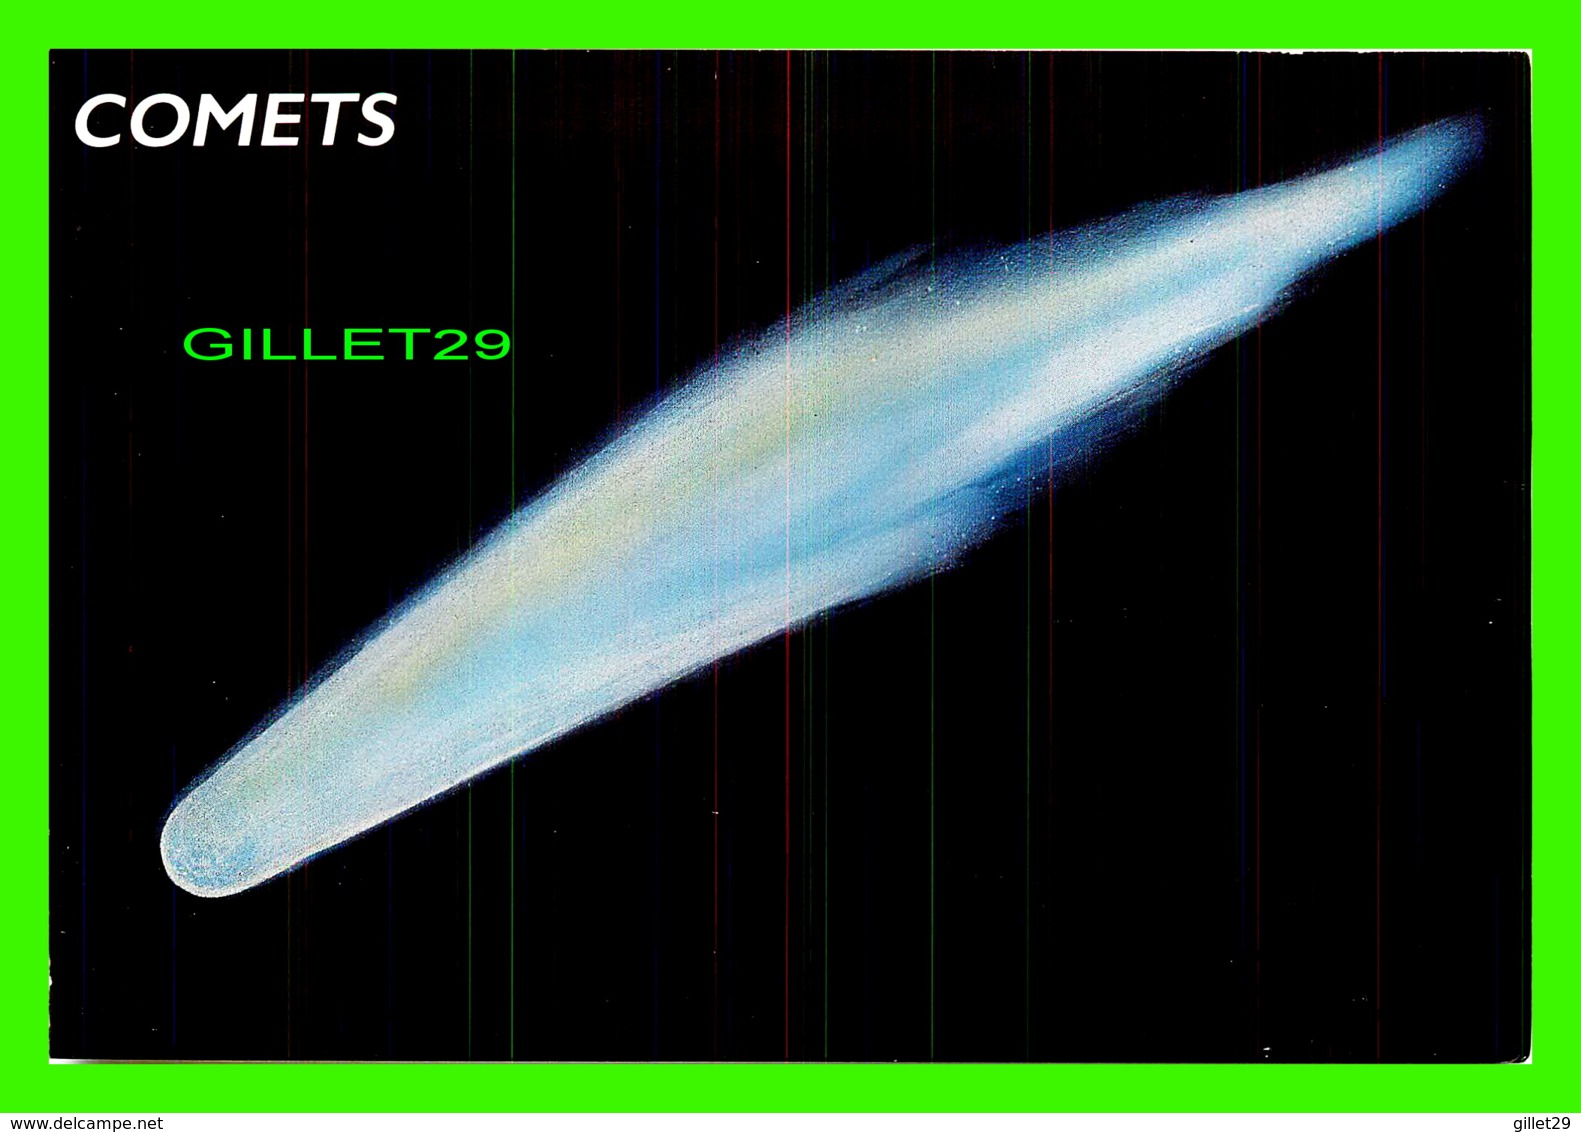 ASTRONOMIE - COMETS - ILLUSTRATED BY BRUCE LAFONTAINE - DIMENSION 11.5 X 17 Cm - - Sterrenkunde